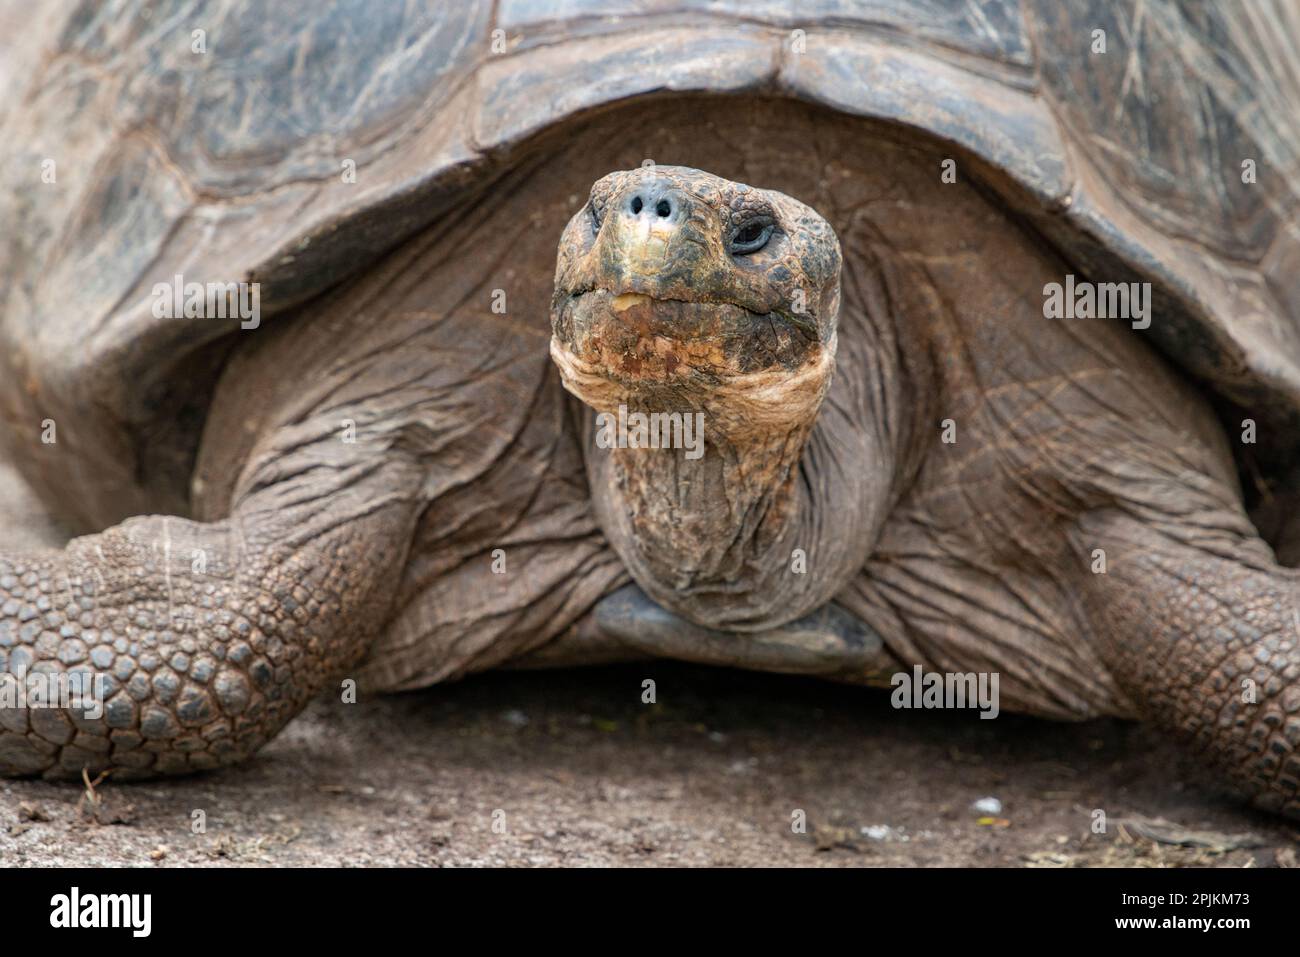 Giant tortoise lumbers along at the Charles Darwin Research Center. Stock Photo